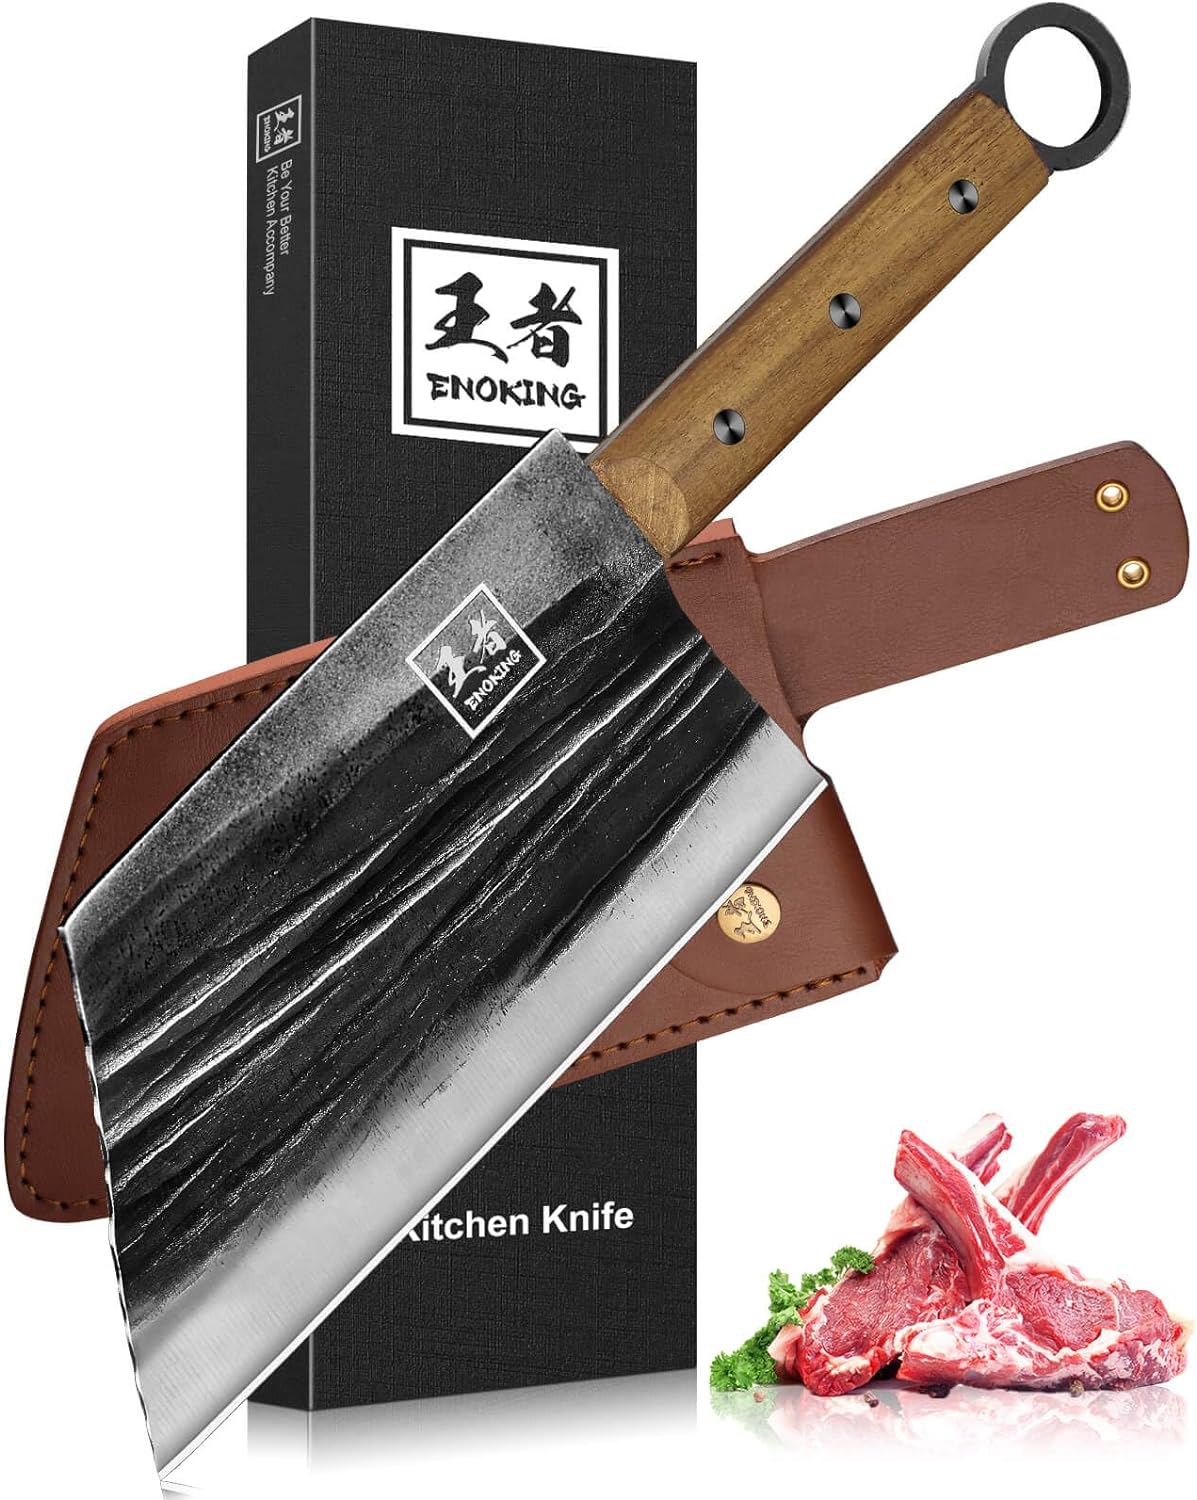 ITS MY GO TO KNIFE VERY SHARP AND WELL MADE. I WOULD RECOMMEND THIS KNIFE AS IT WORTH EVERY PENNY VERY SHARP BLADE. WELL MADE PRODUCT. 5 STARS EASY.